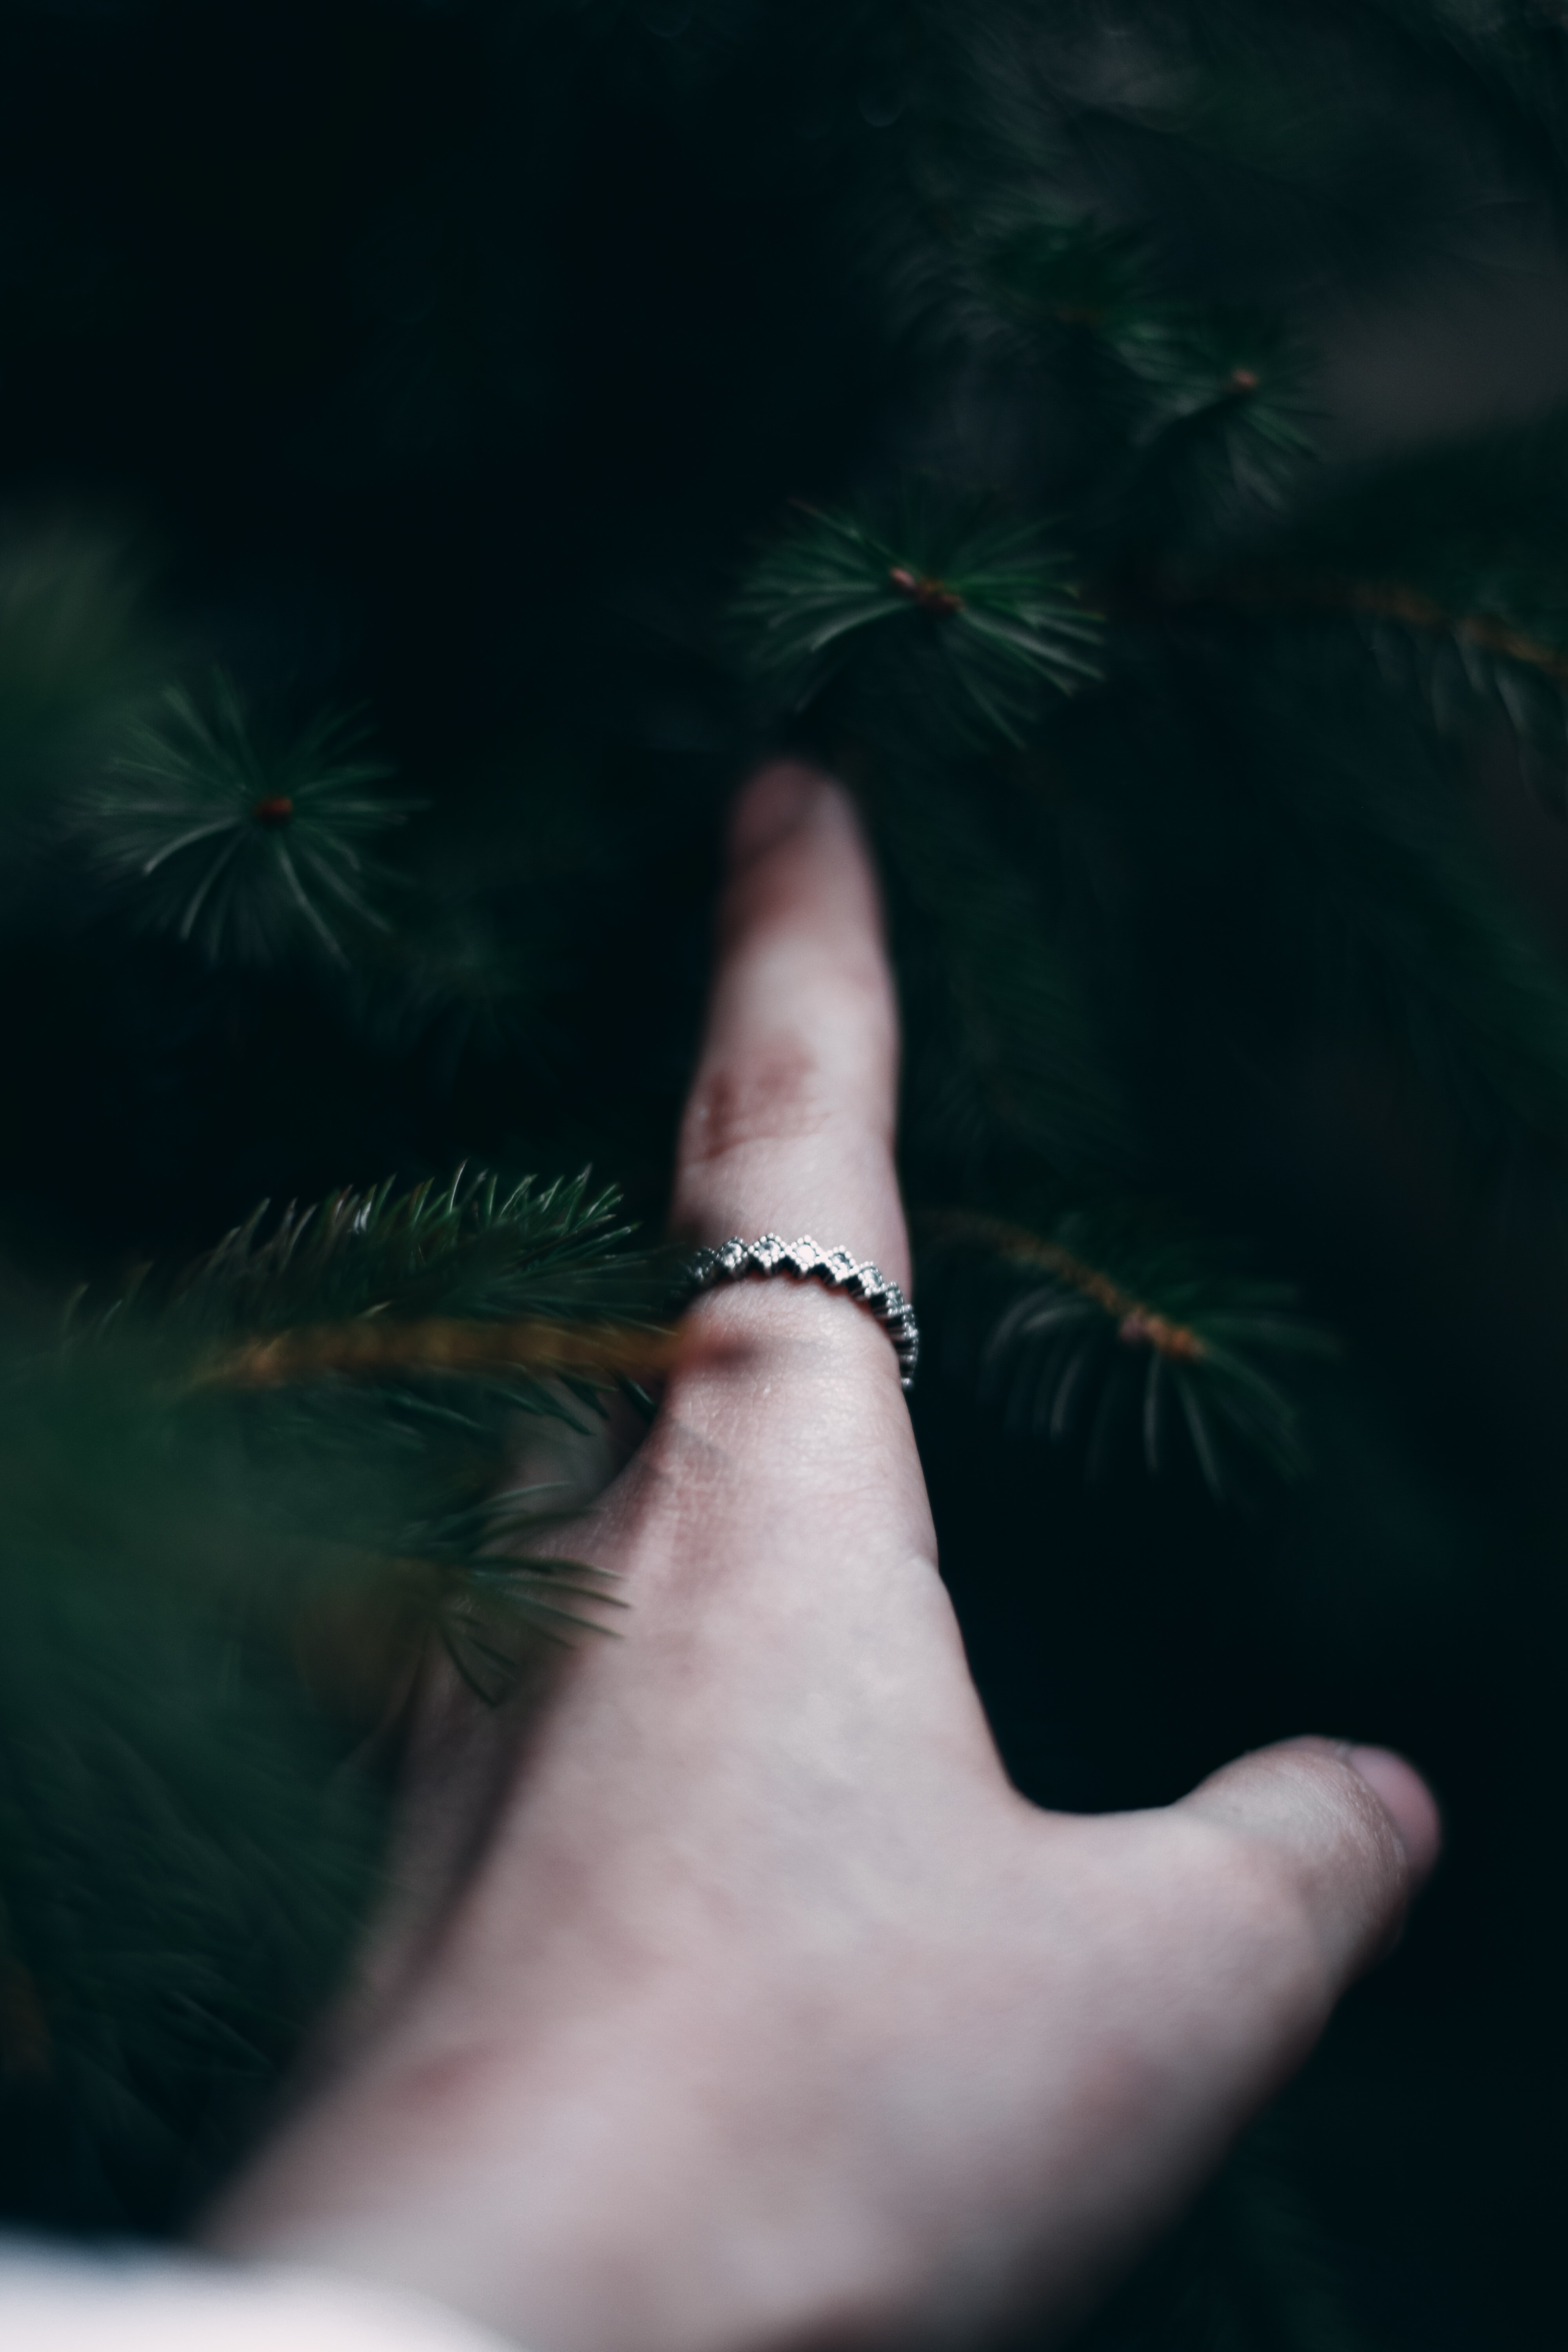 touch, hand, miscellanea, miscellaneous, branches, spruce, fir, touching, finger